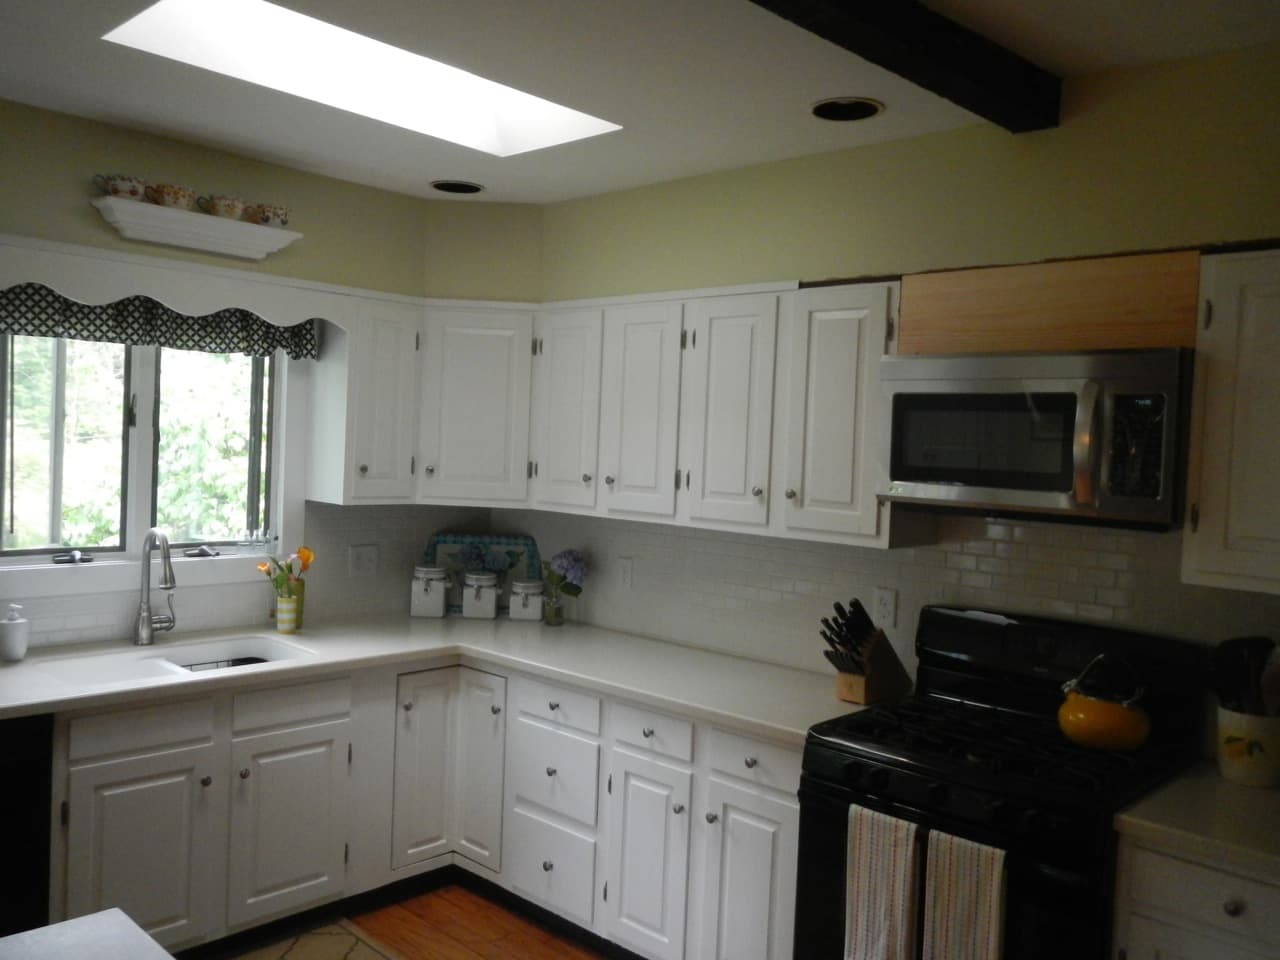 New Kitchen Tile: Complete! - School House Rehab